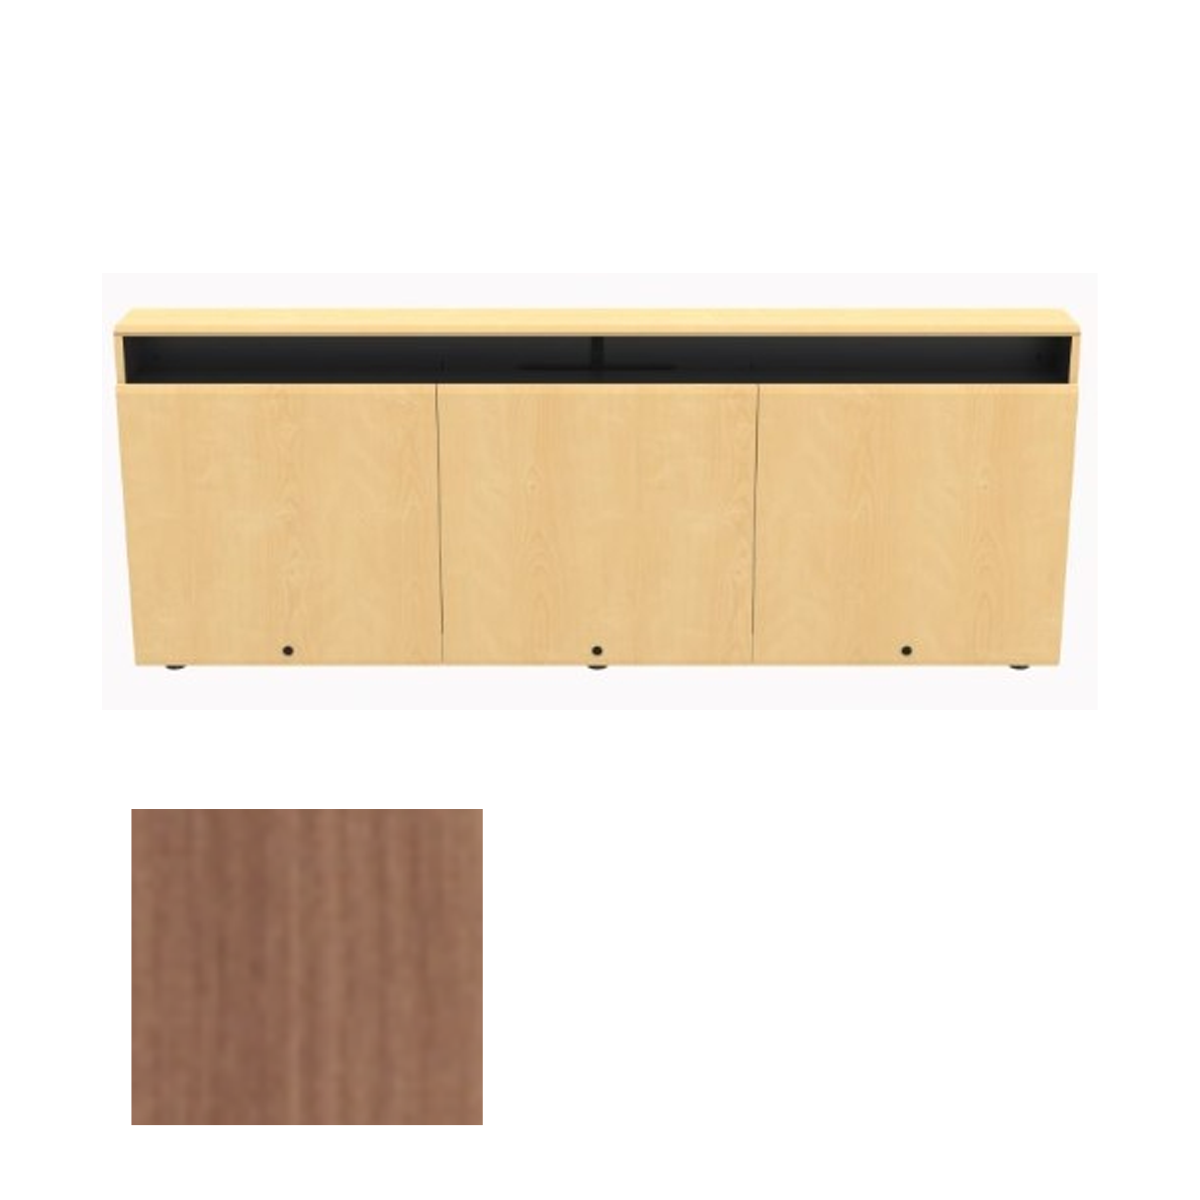 CR3-WM RCT Triple Rack Wall Mounted Credenza, River Cherry